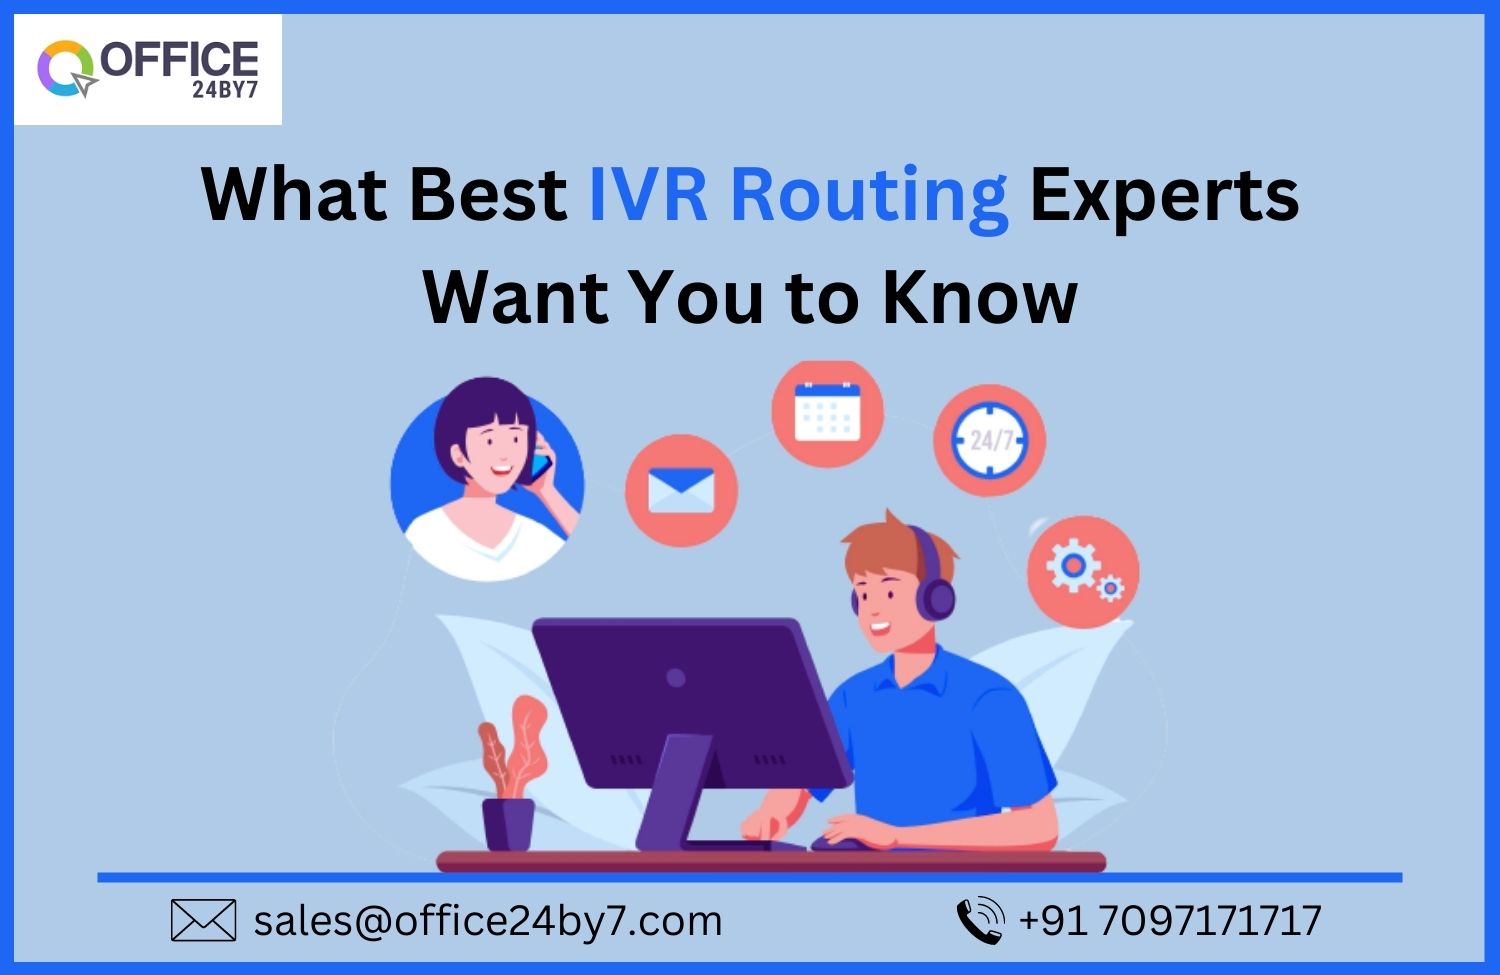 What Best IVR Routing Experts Want You to Know